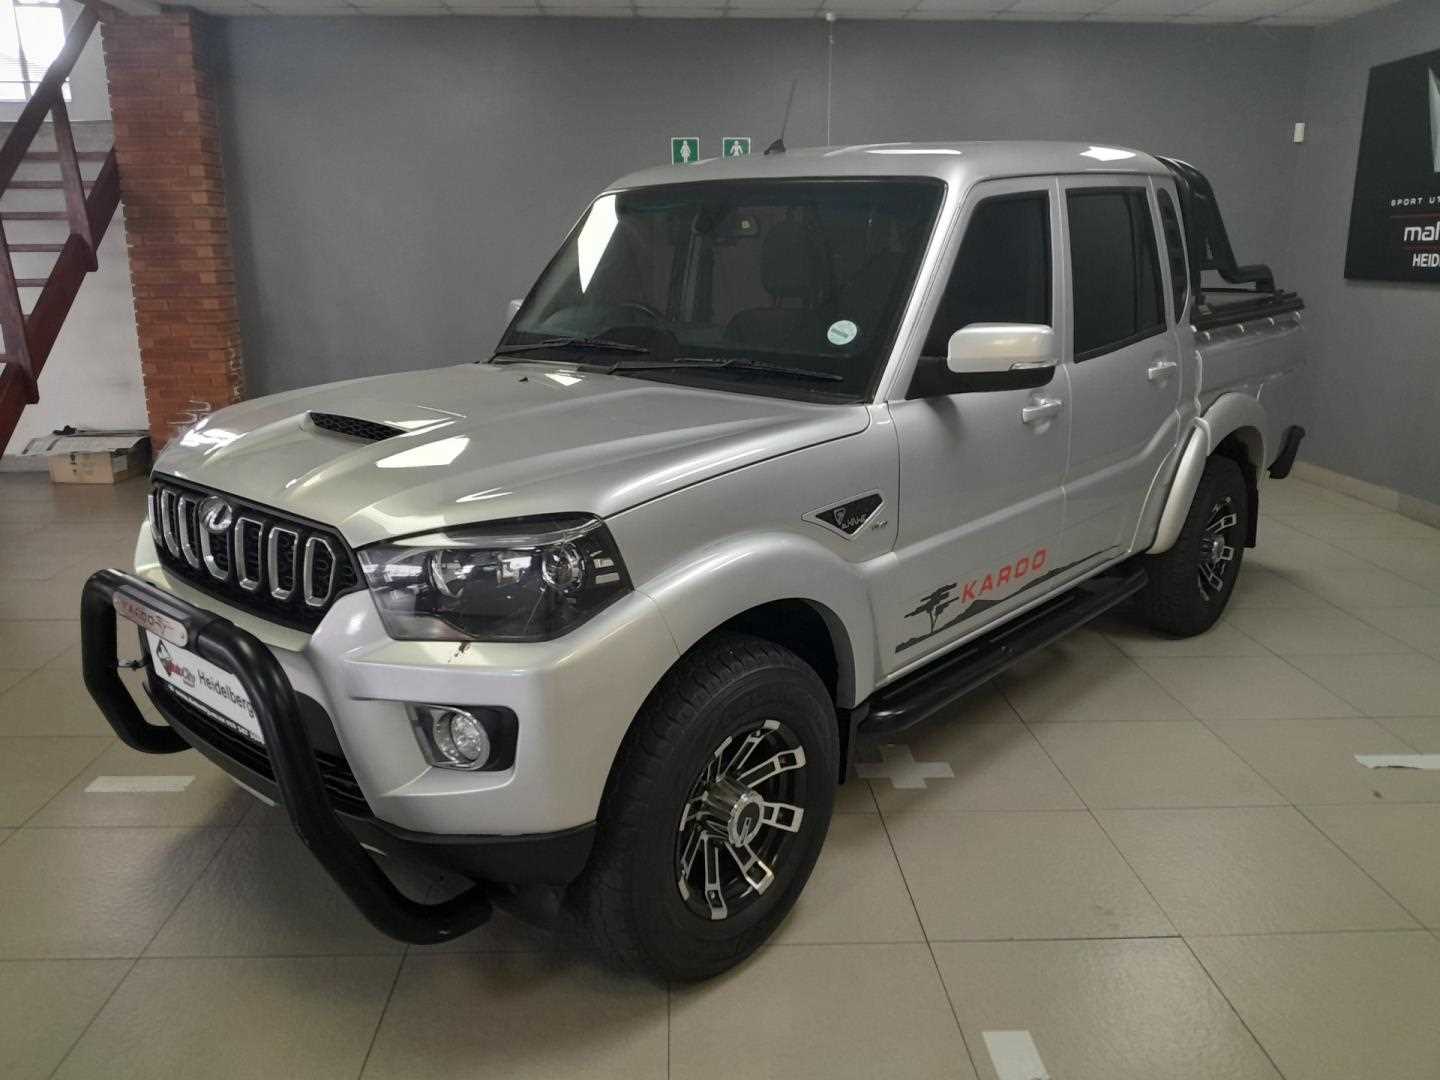 Mahindra 2.2 mHawk DC 4×2 S11 A/t Karoo Edition for Sale in South Africa